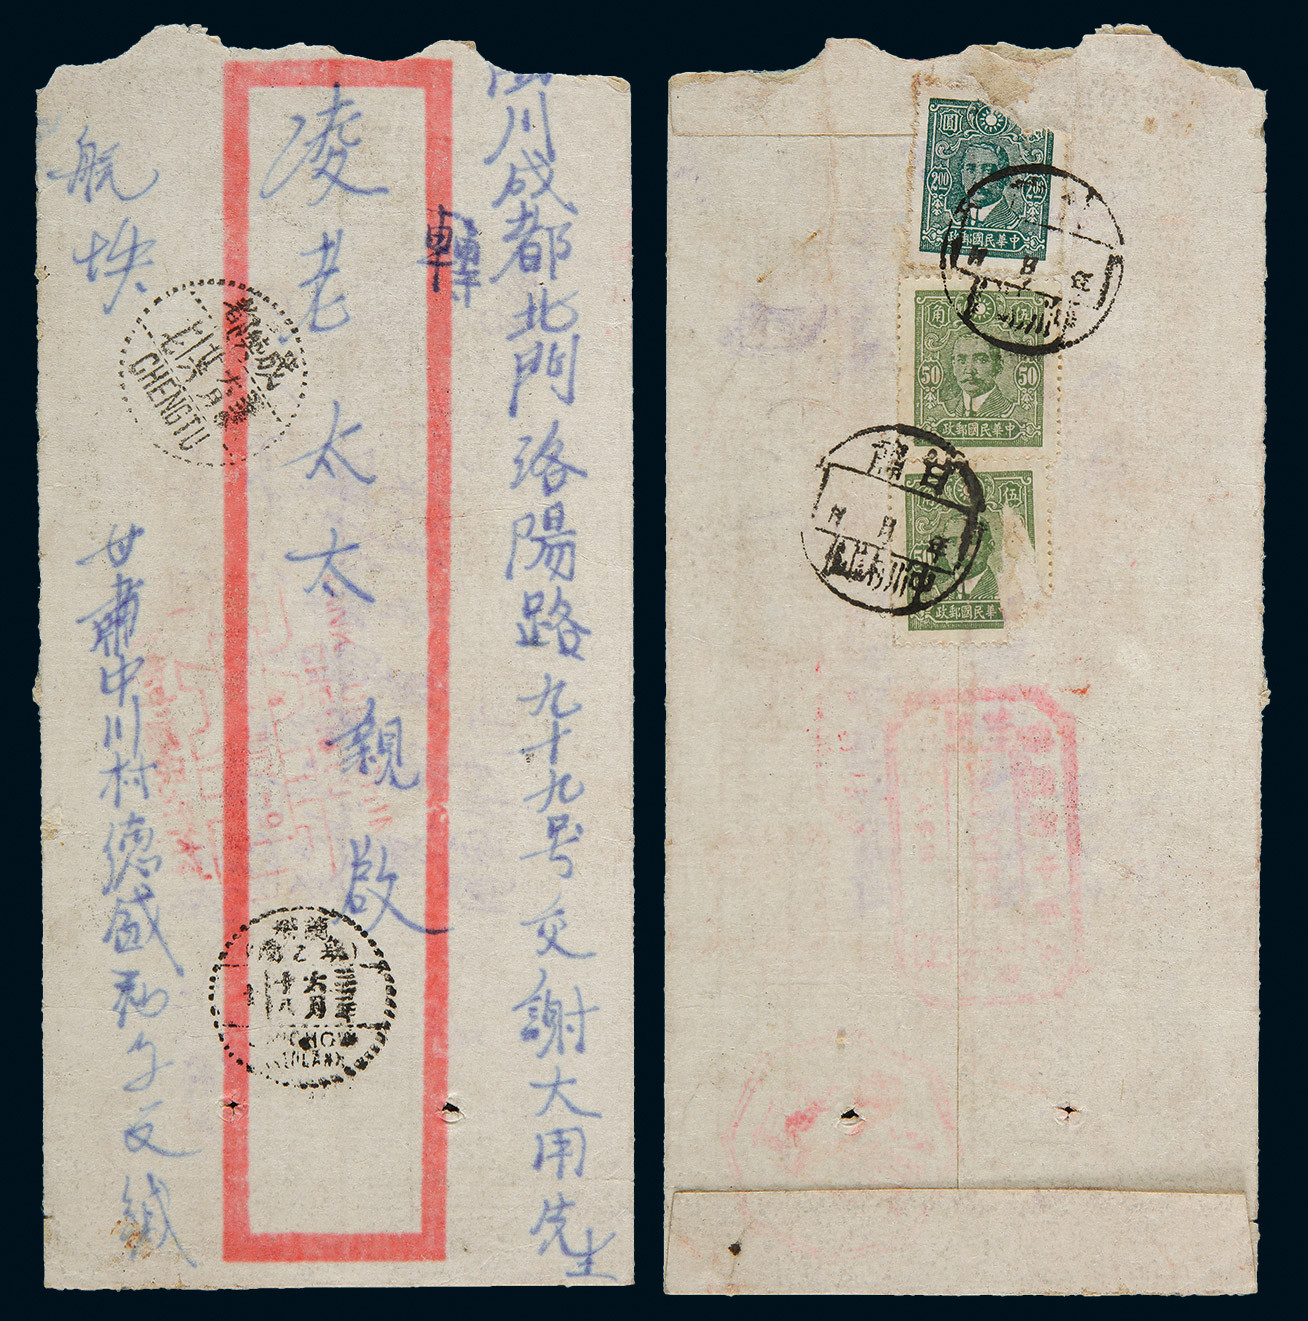 1943 Anti-Japanese war registered airmail express cover sent from Zhongchuan village to Chengdu.